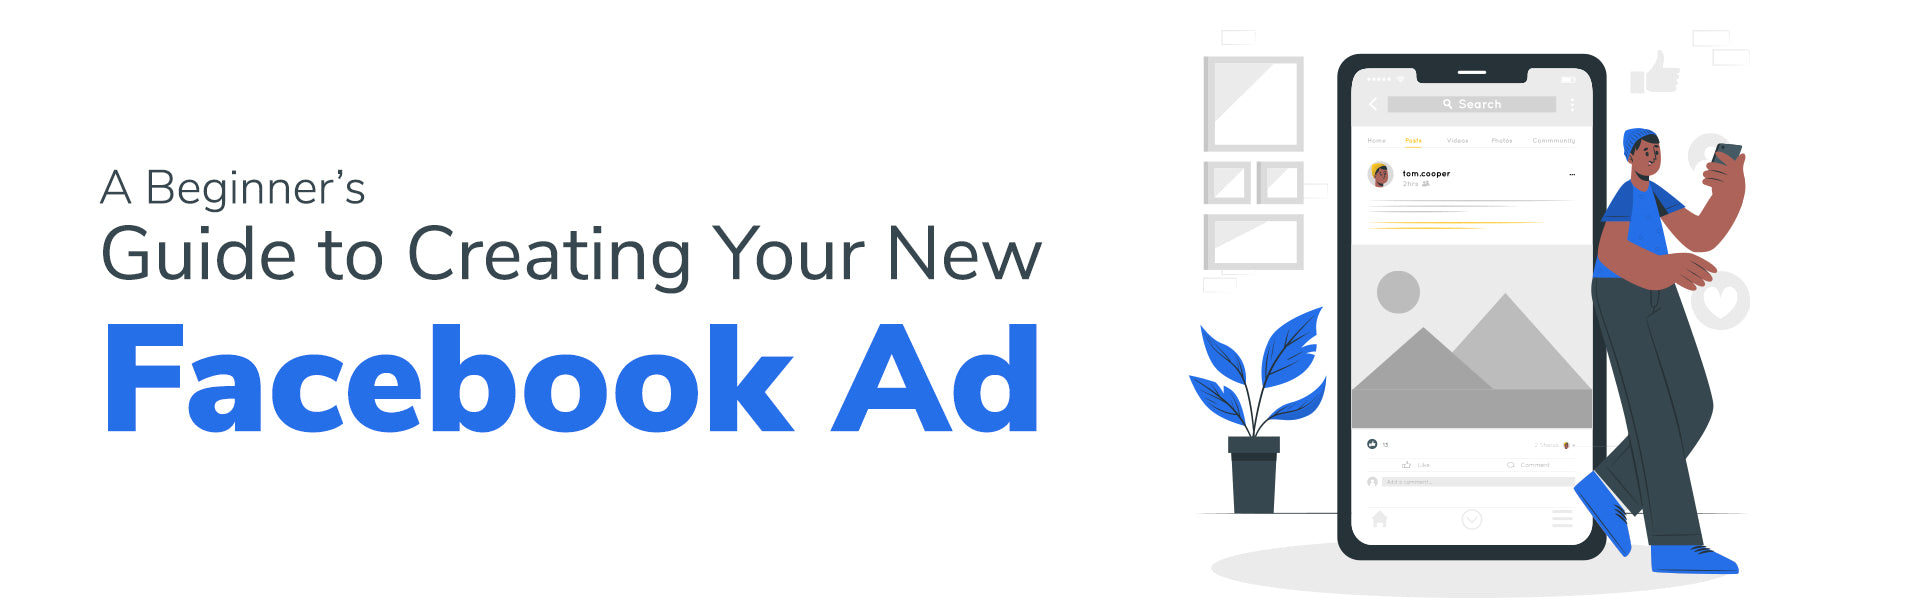 A Beginner’s Guide to Creating Your New Facebook Ad